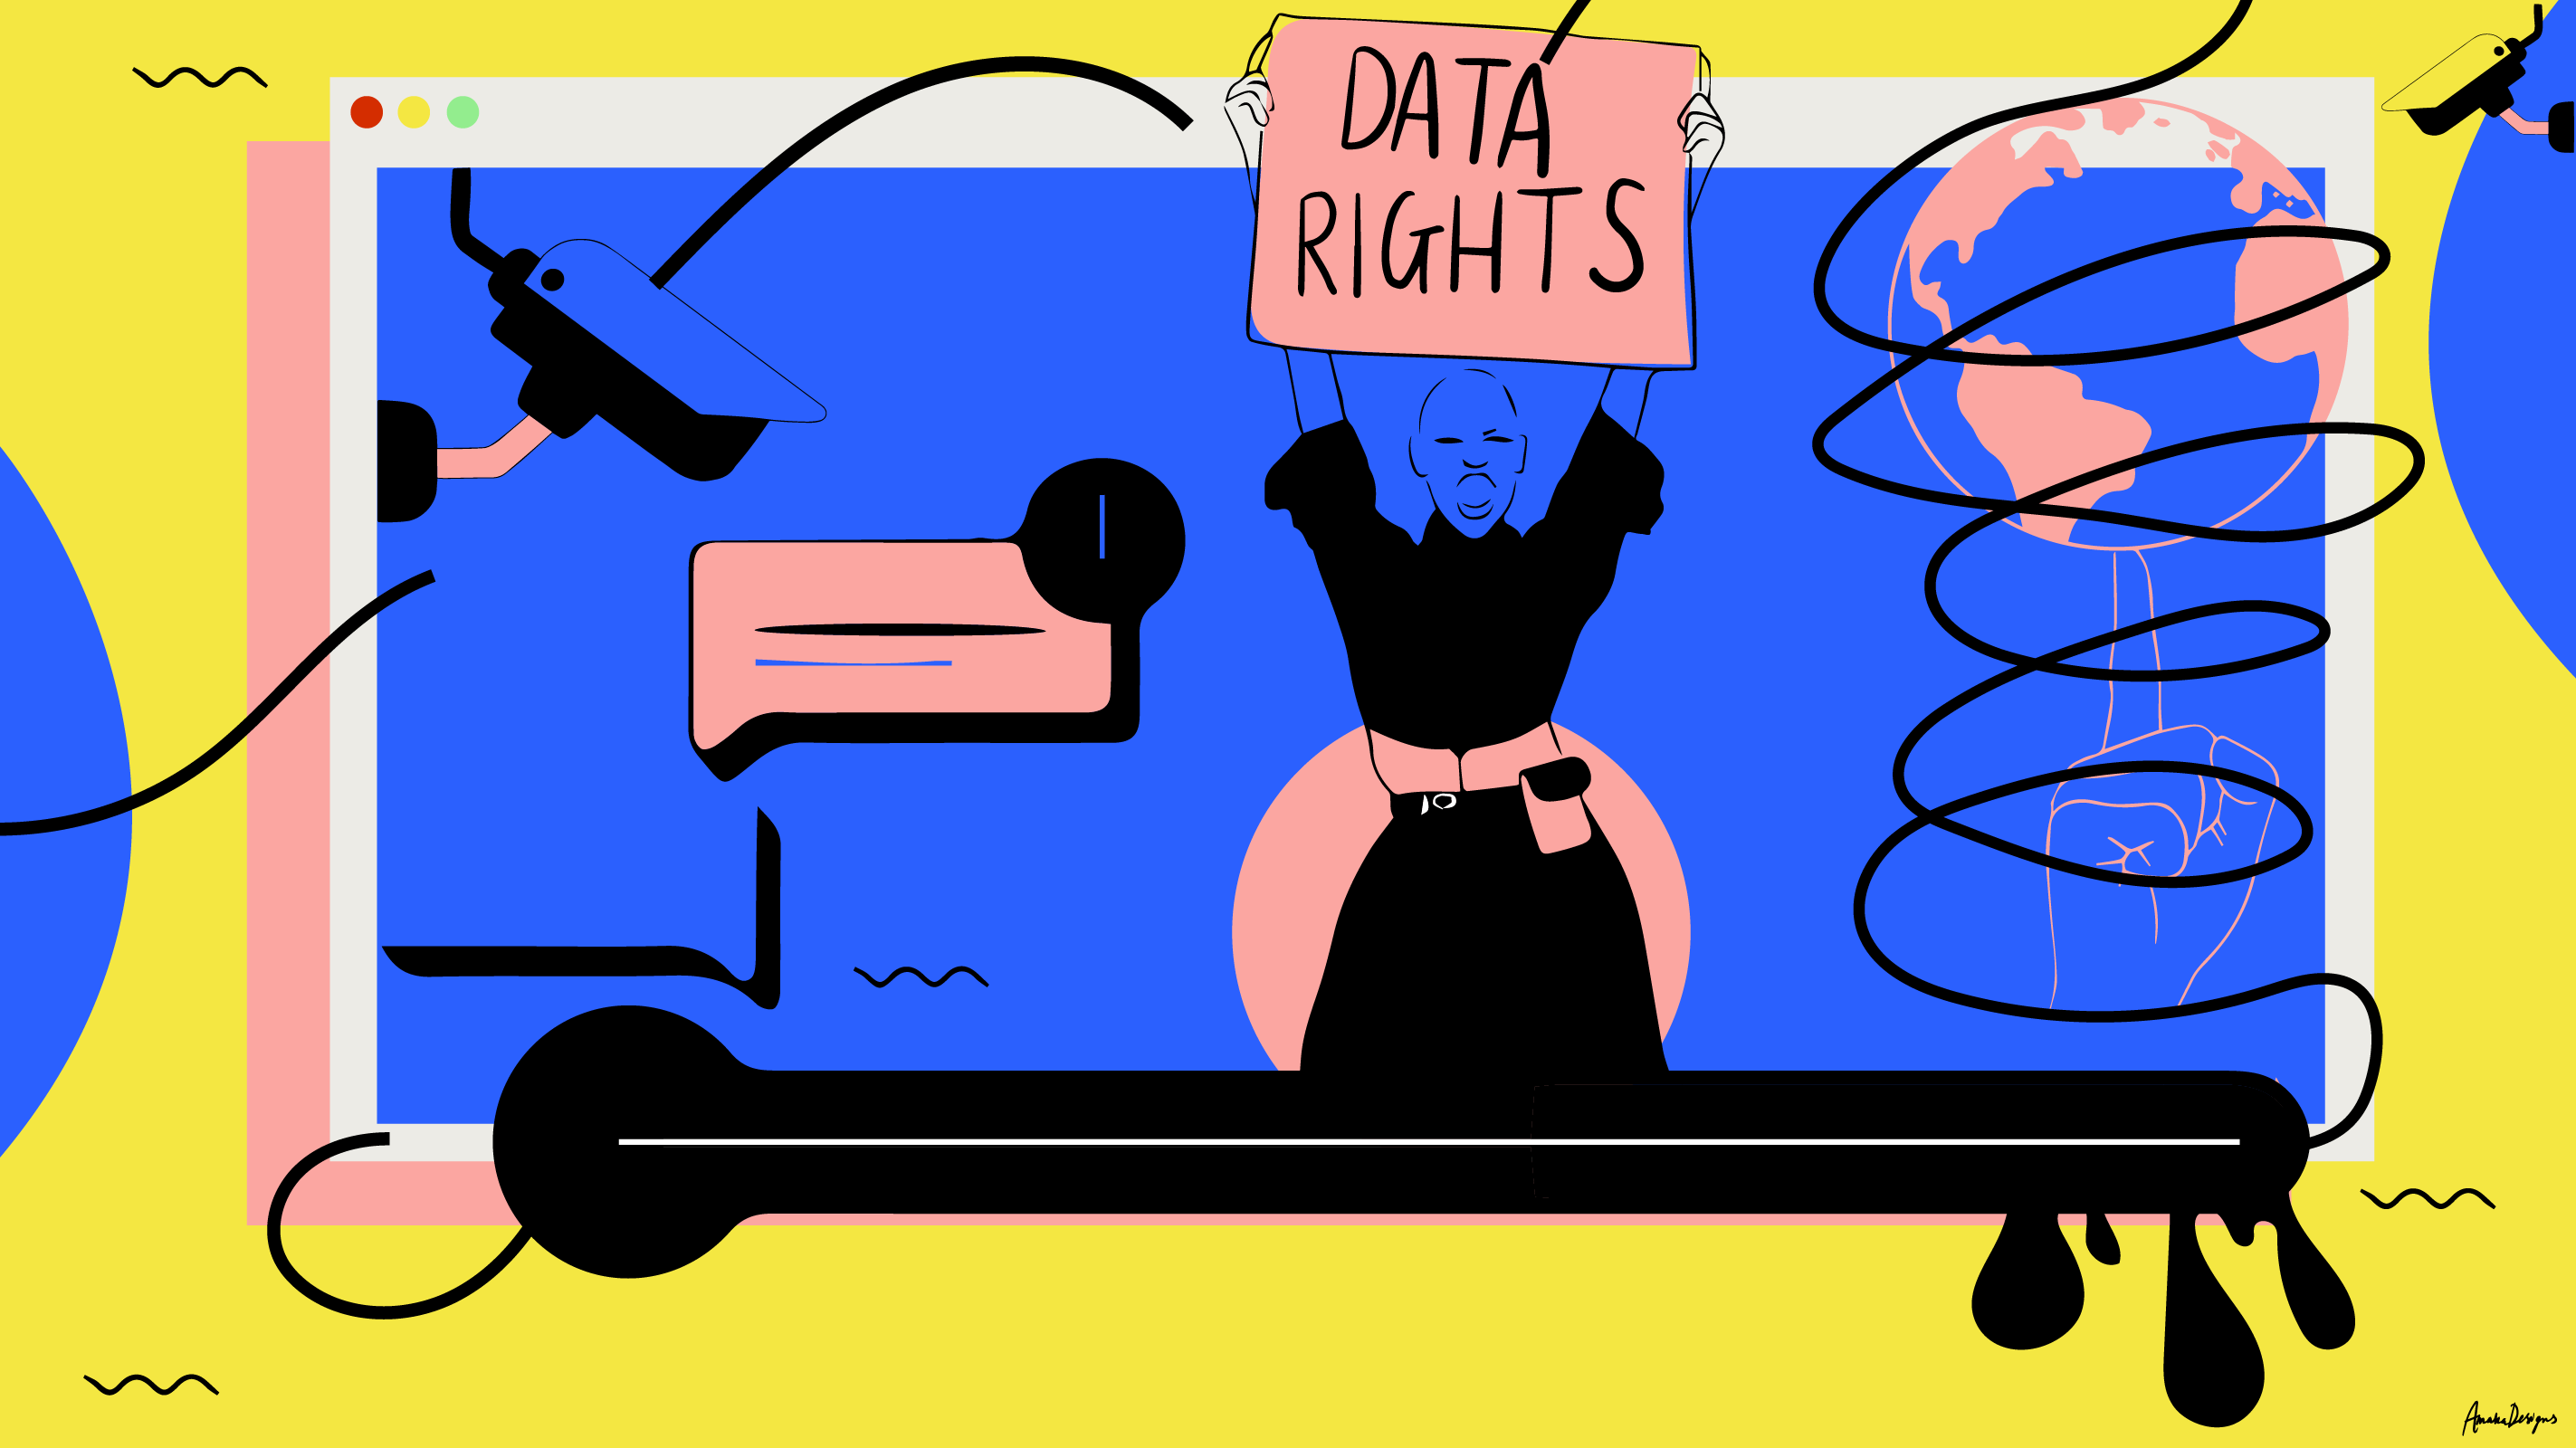 The Fight for Data Rights lead image is brightly coloured illustration. It shows a woman holding up a placard that says 'Data Rights'. Within the frame, which look s like a tab on an internet browser, there is also a surveillance camera and some message bubbles, similar to what you would expect to see on Whatsapp or Facebook. In the top right hand corner there is an image of the world globe.